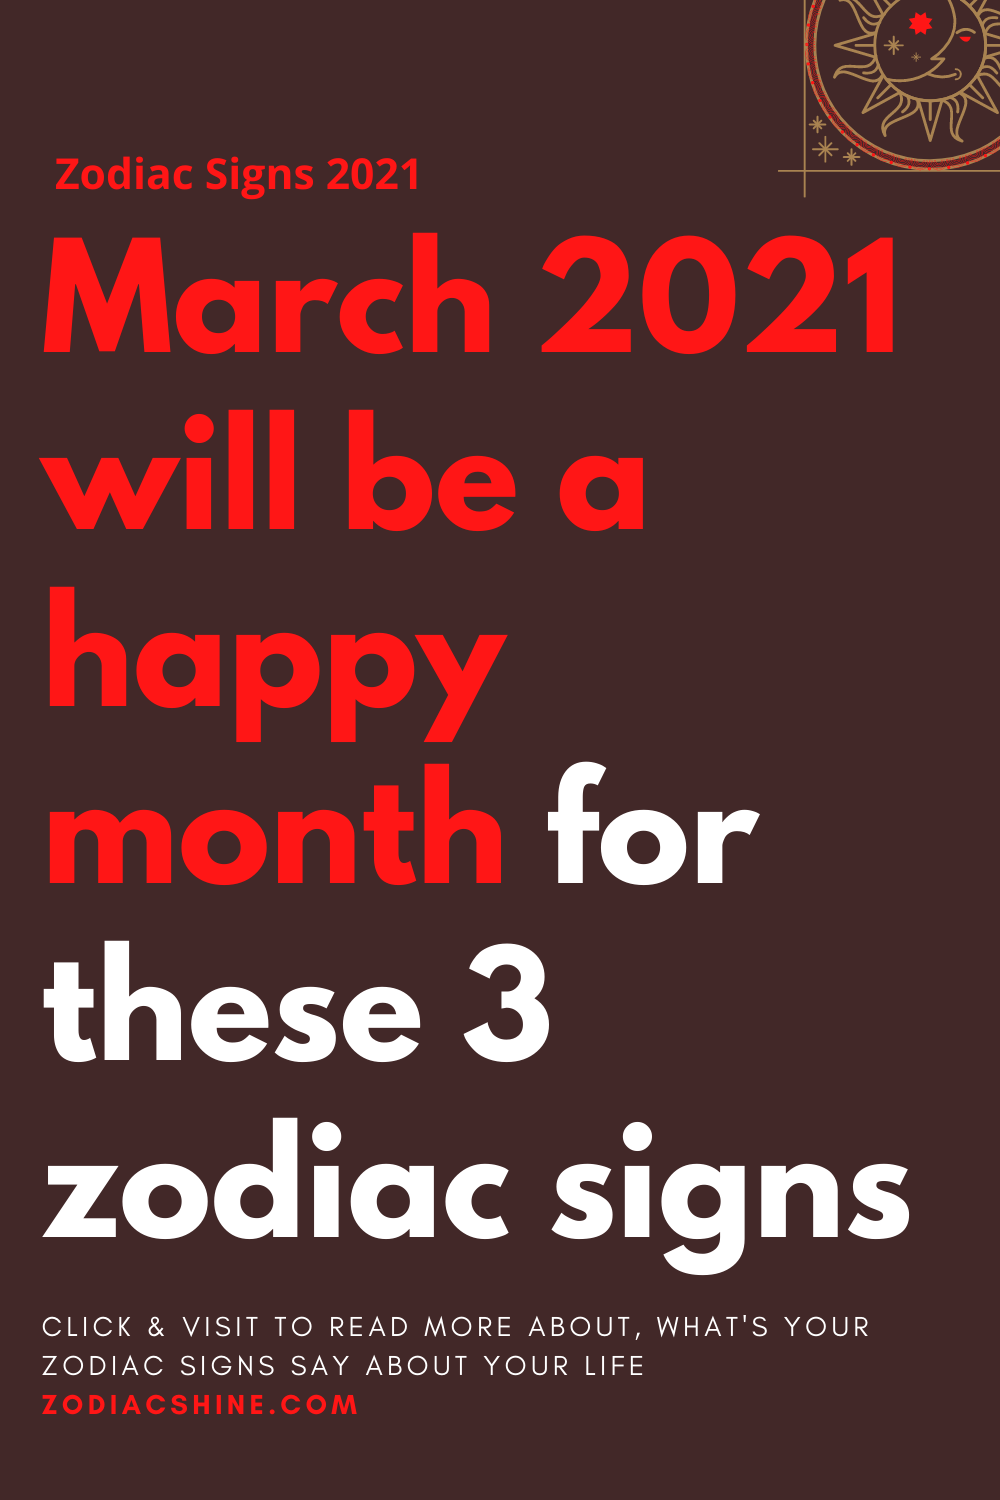 March 2021 will be a happy month for these 3 zodiac signs